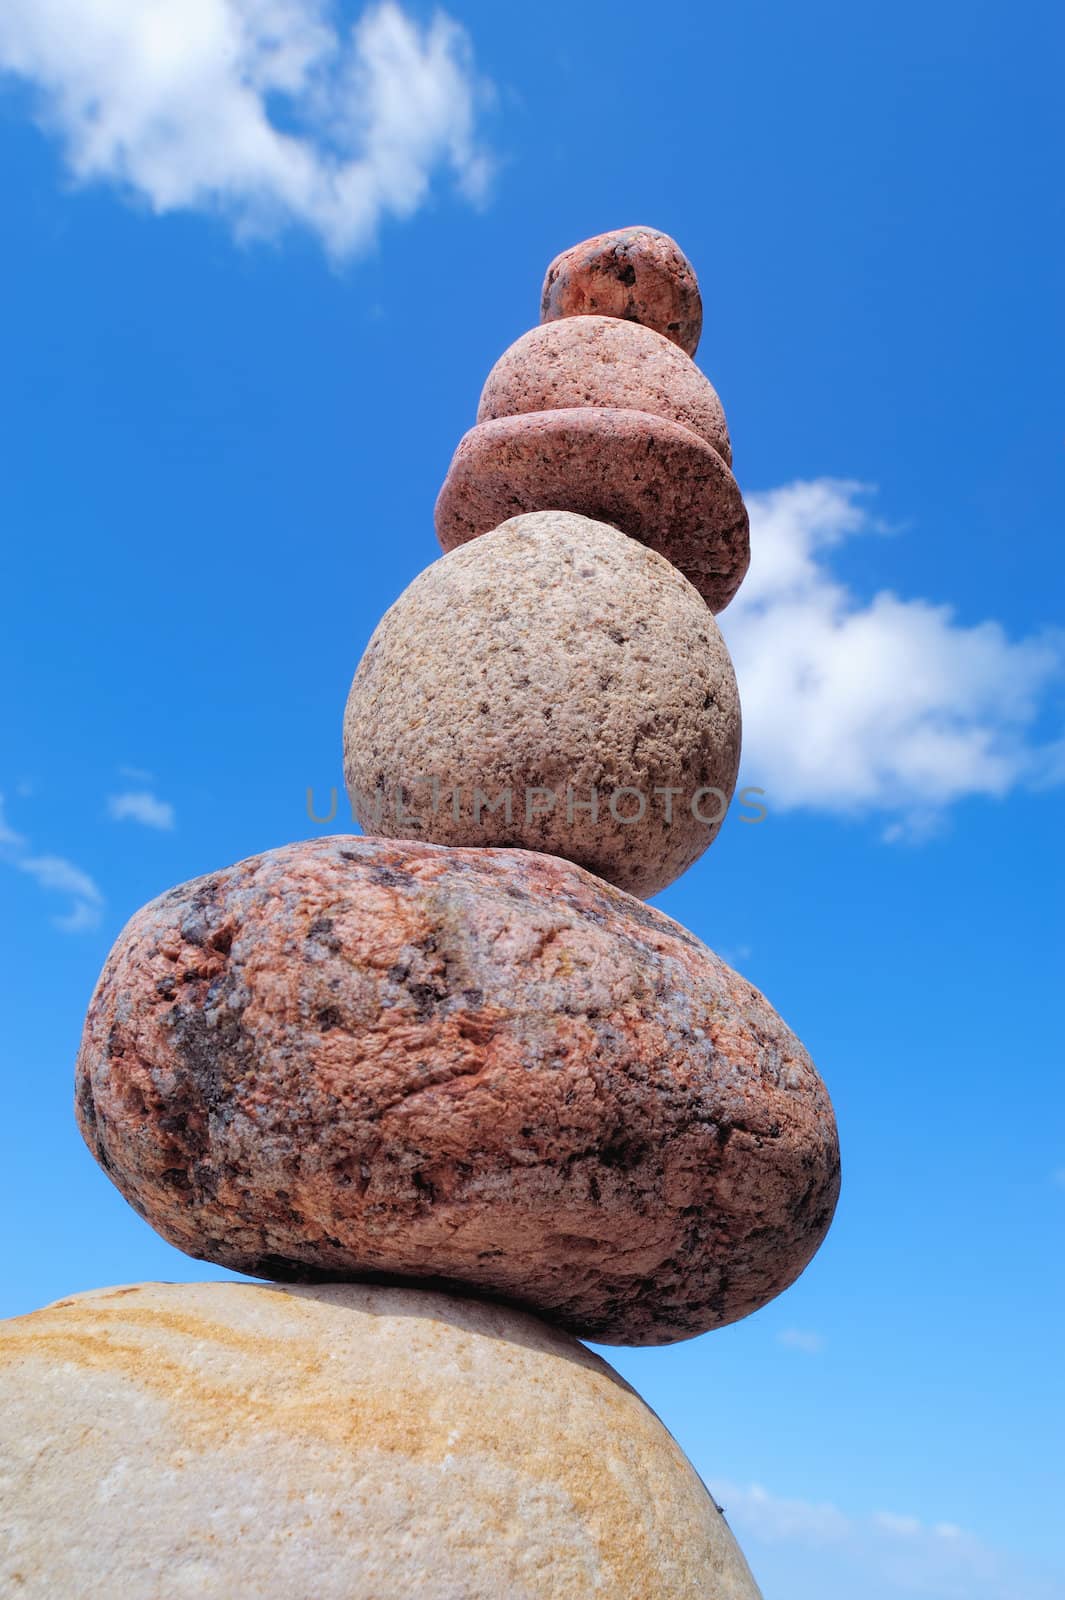 Bottom view of a pile of pebbles against the sky